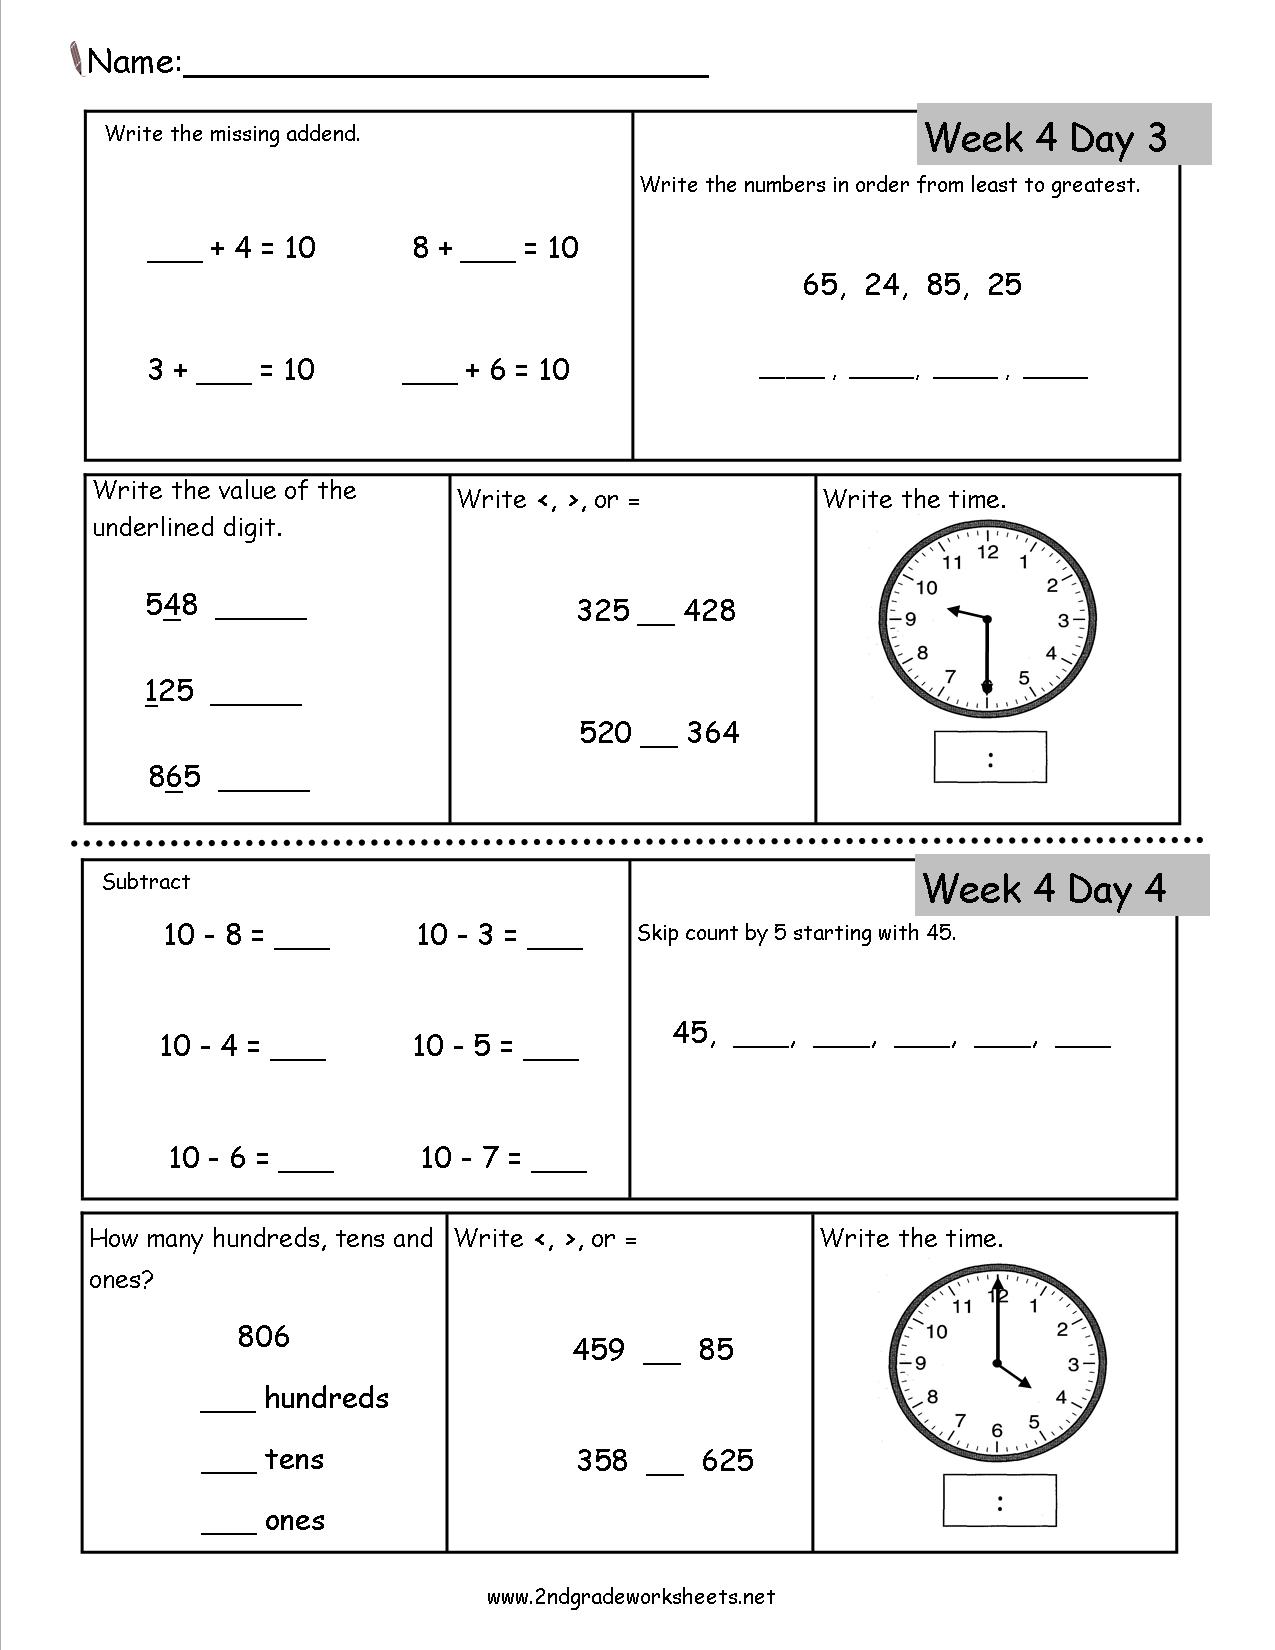 13 Best Images Of Printable Music Worksheets Free Printable Music History Worksheets Teaching